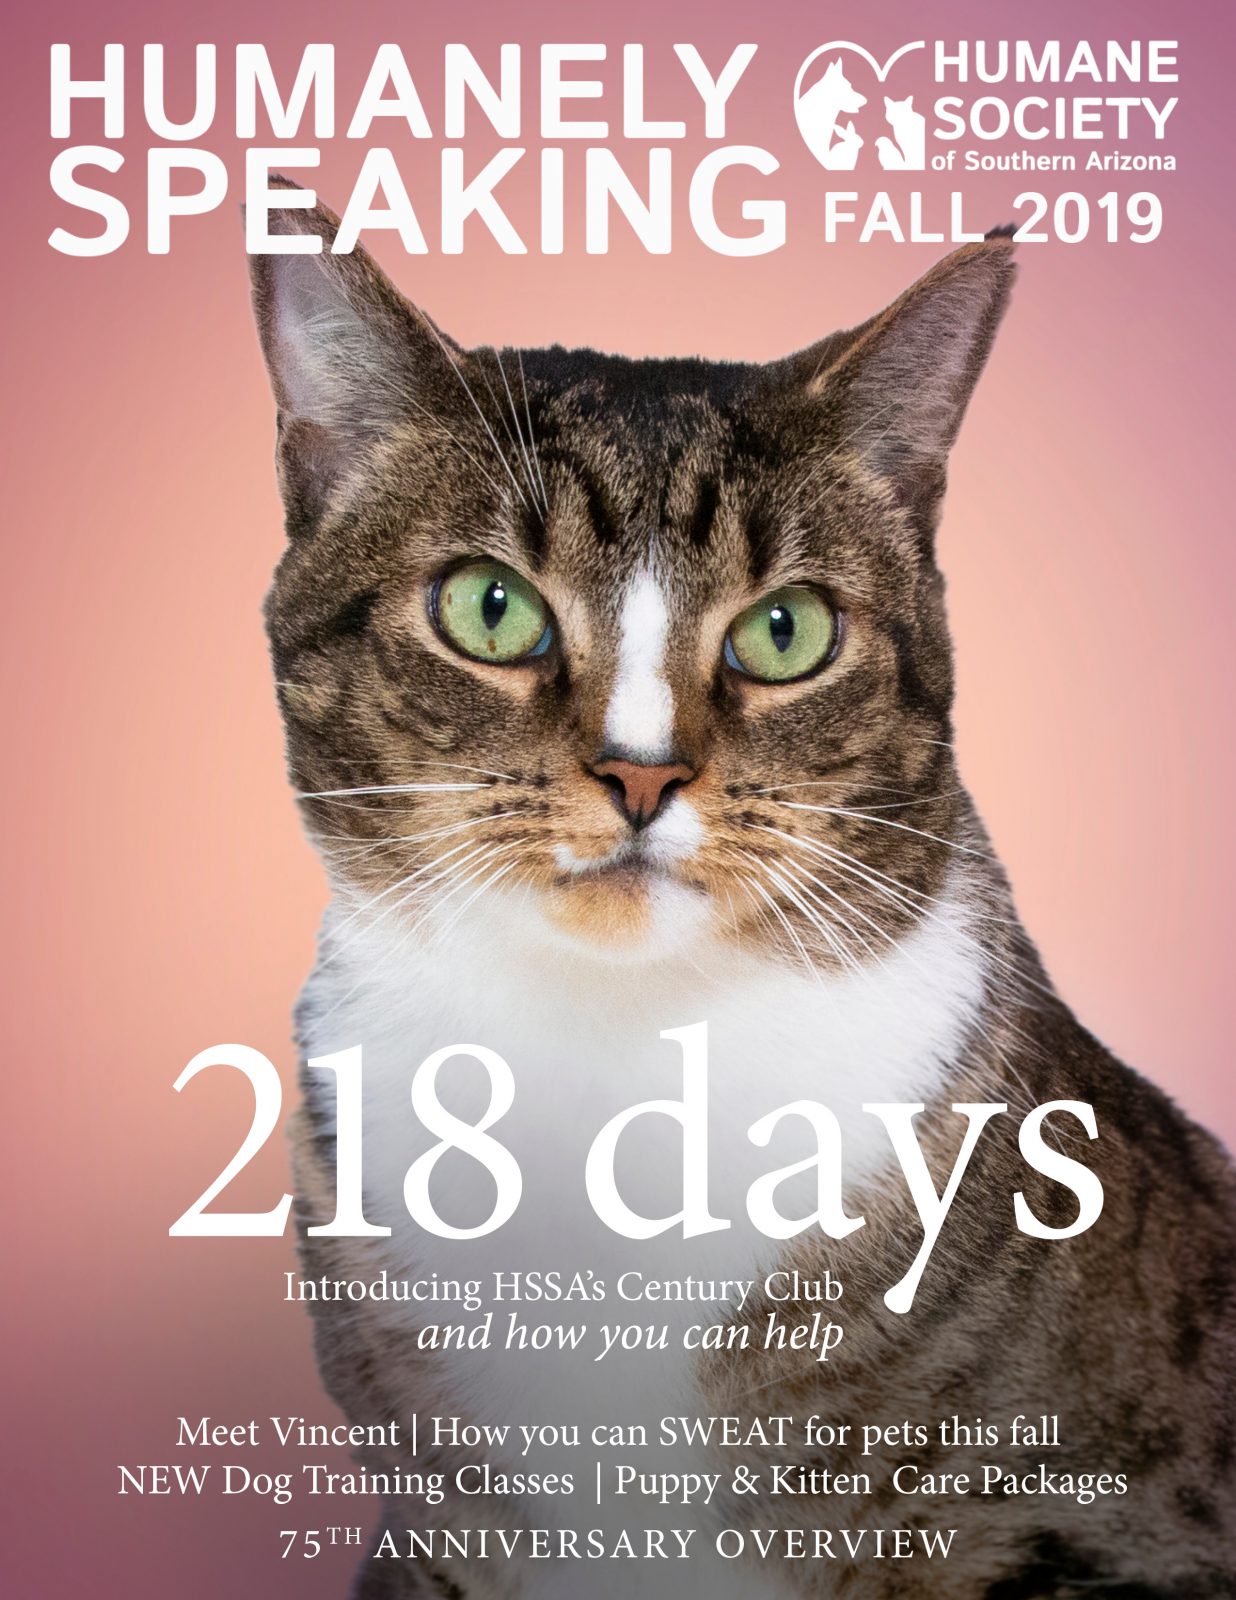 Humanely Speaking Fall 2019